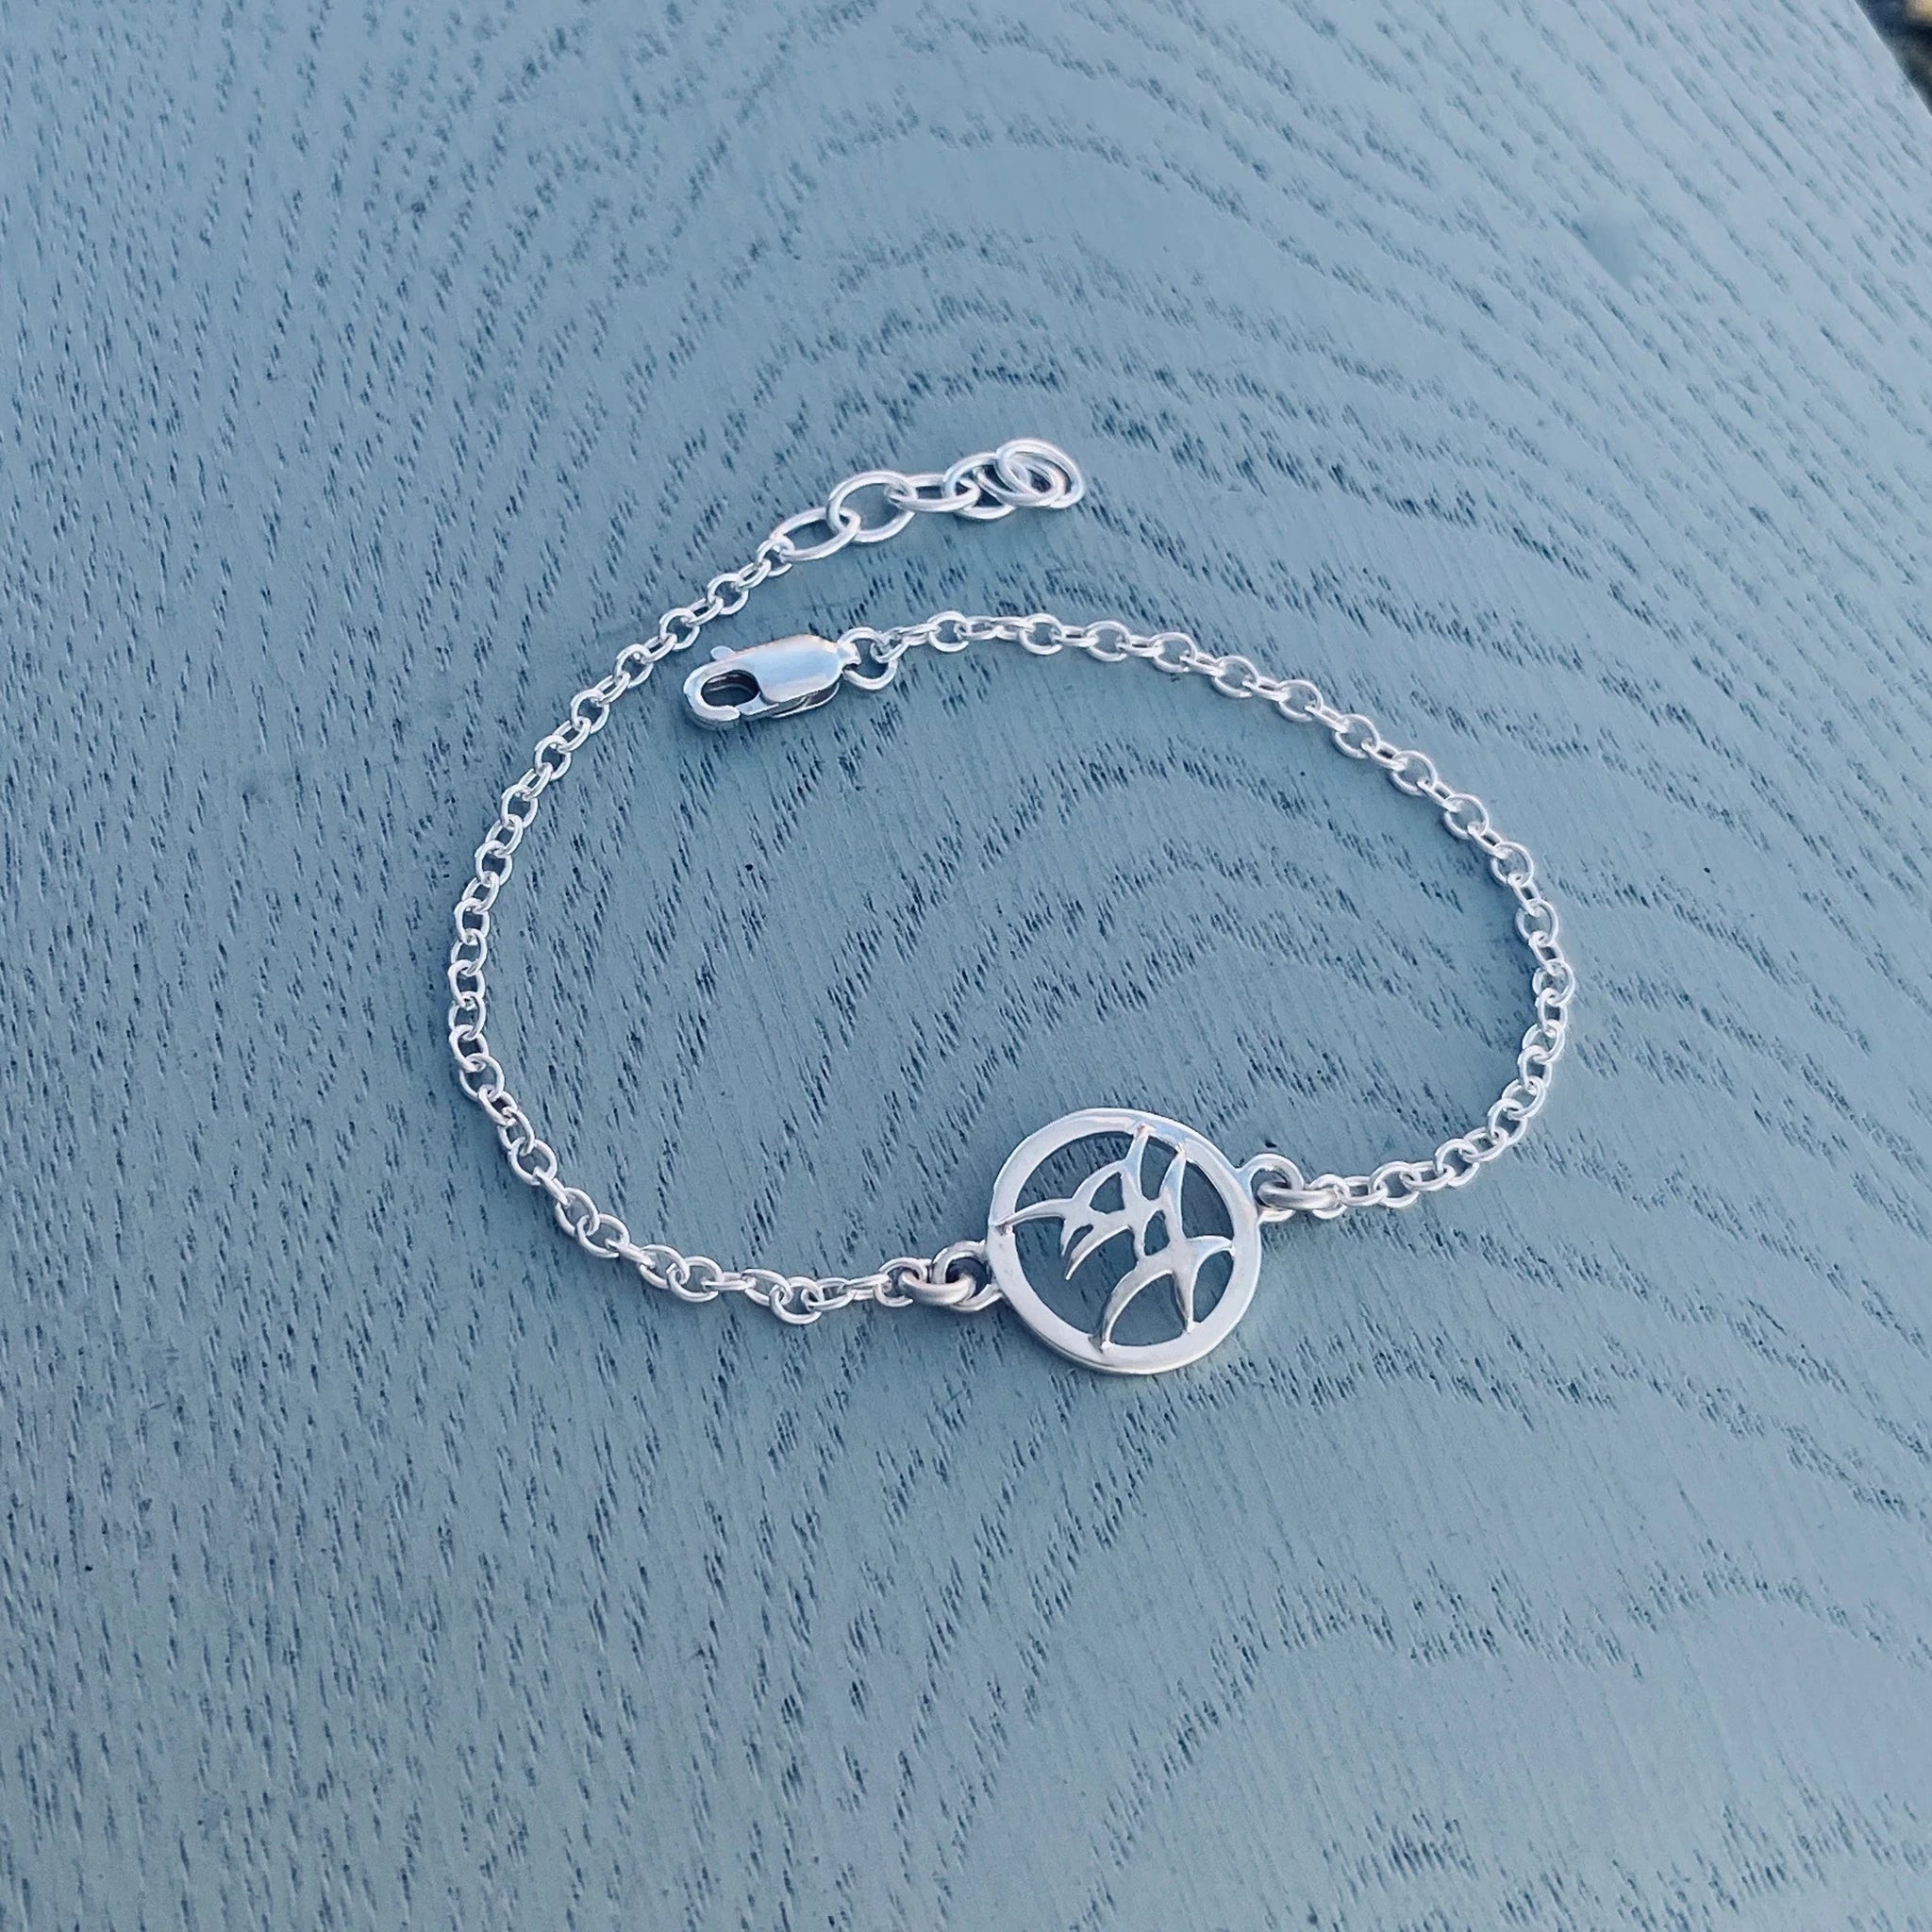 A silver chain link bracelet with a round pendant featuring a flock of birds